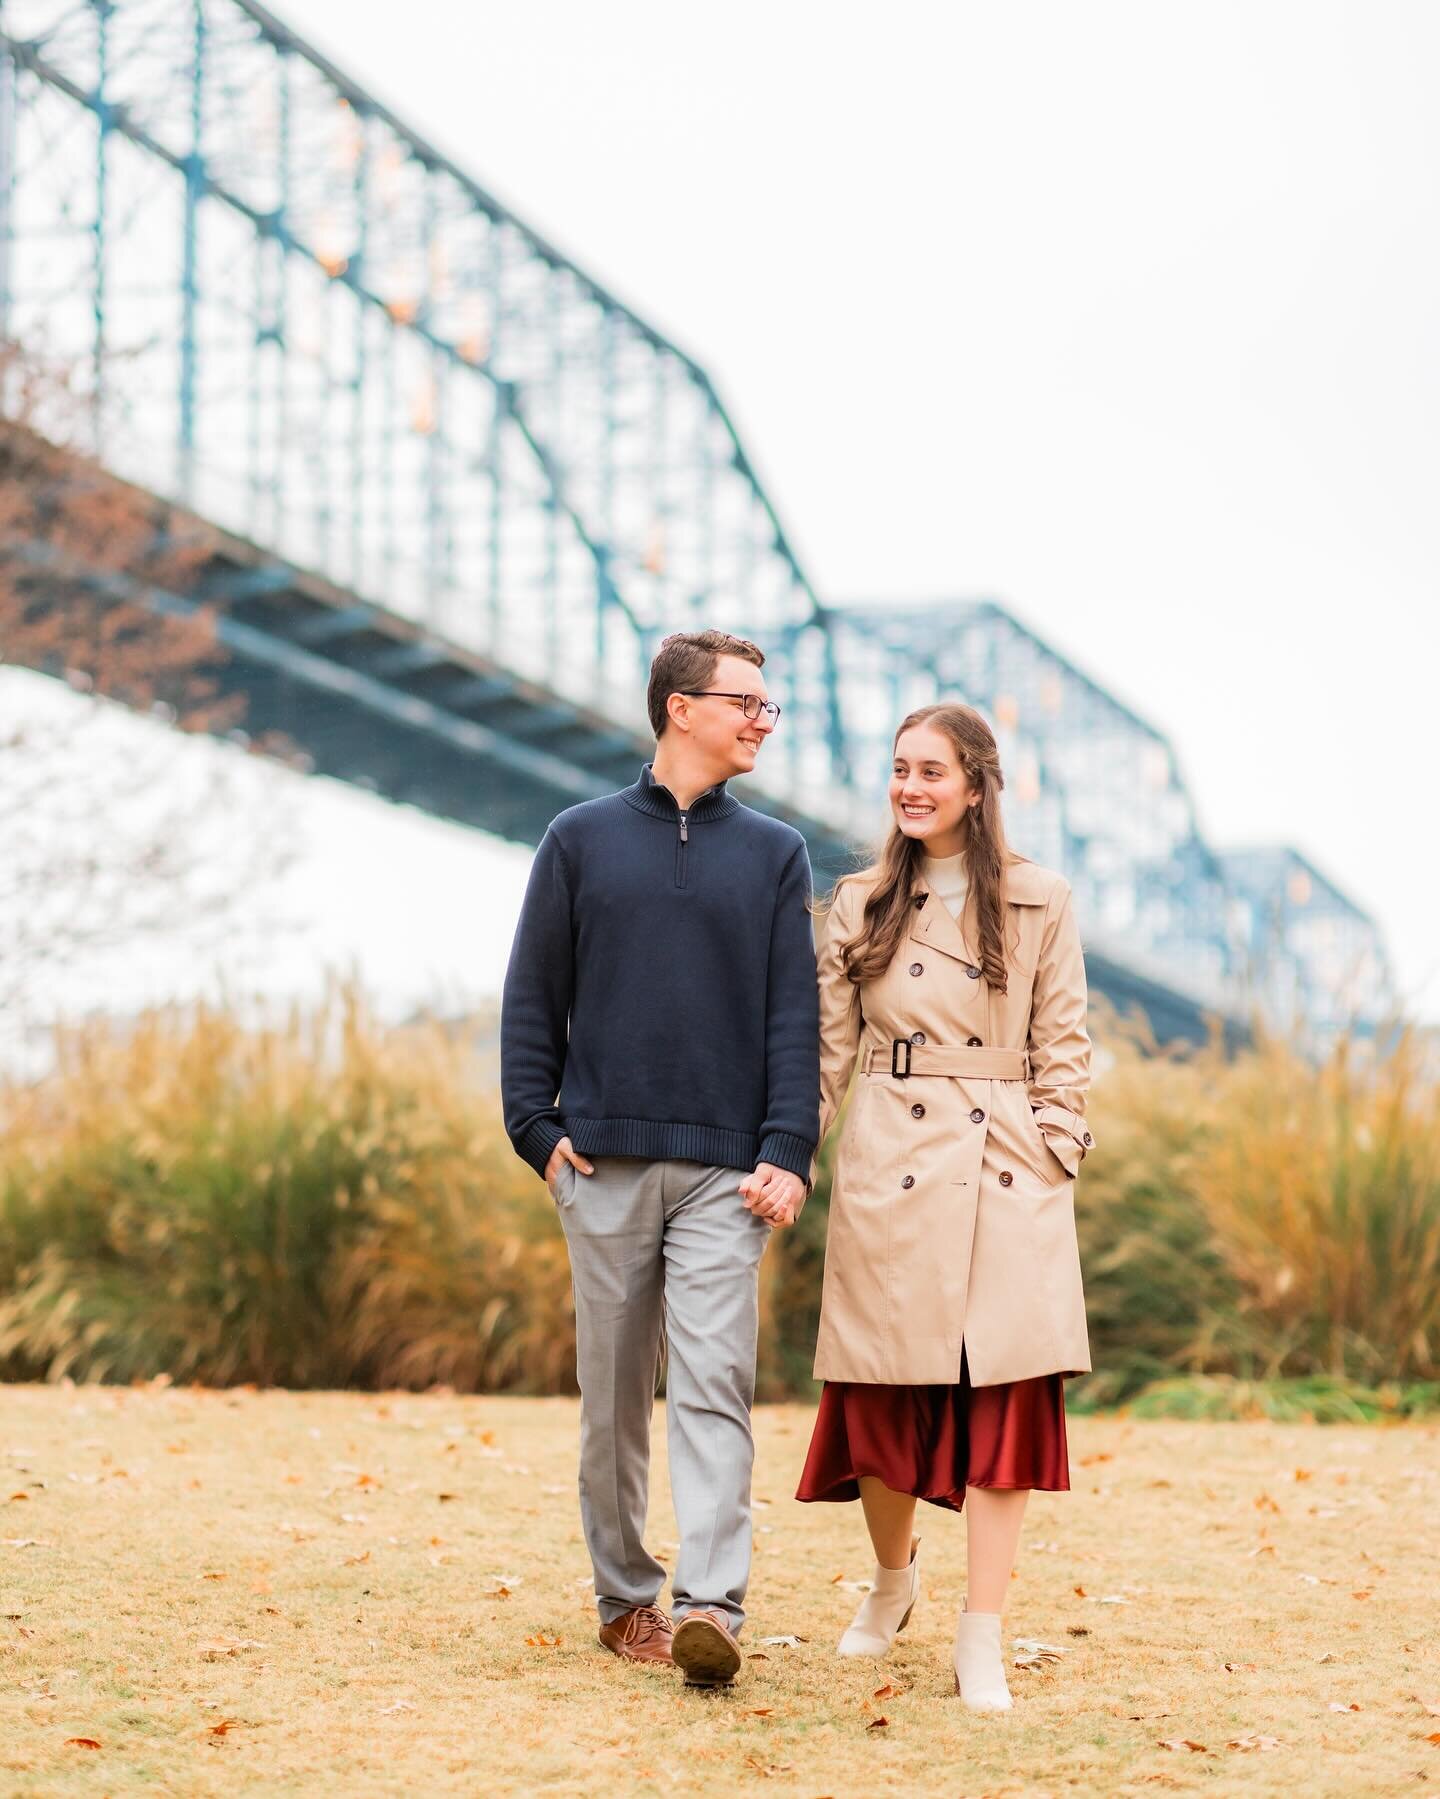 Part one of Amanda and Ben&rsquo;s engagement session! These two truly love each other and had so much fun during their session!

Chattanooga engagement photographer. Chattanooga wedding photographer. Chattanooga elopement photographer.